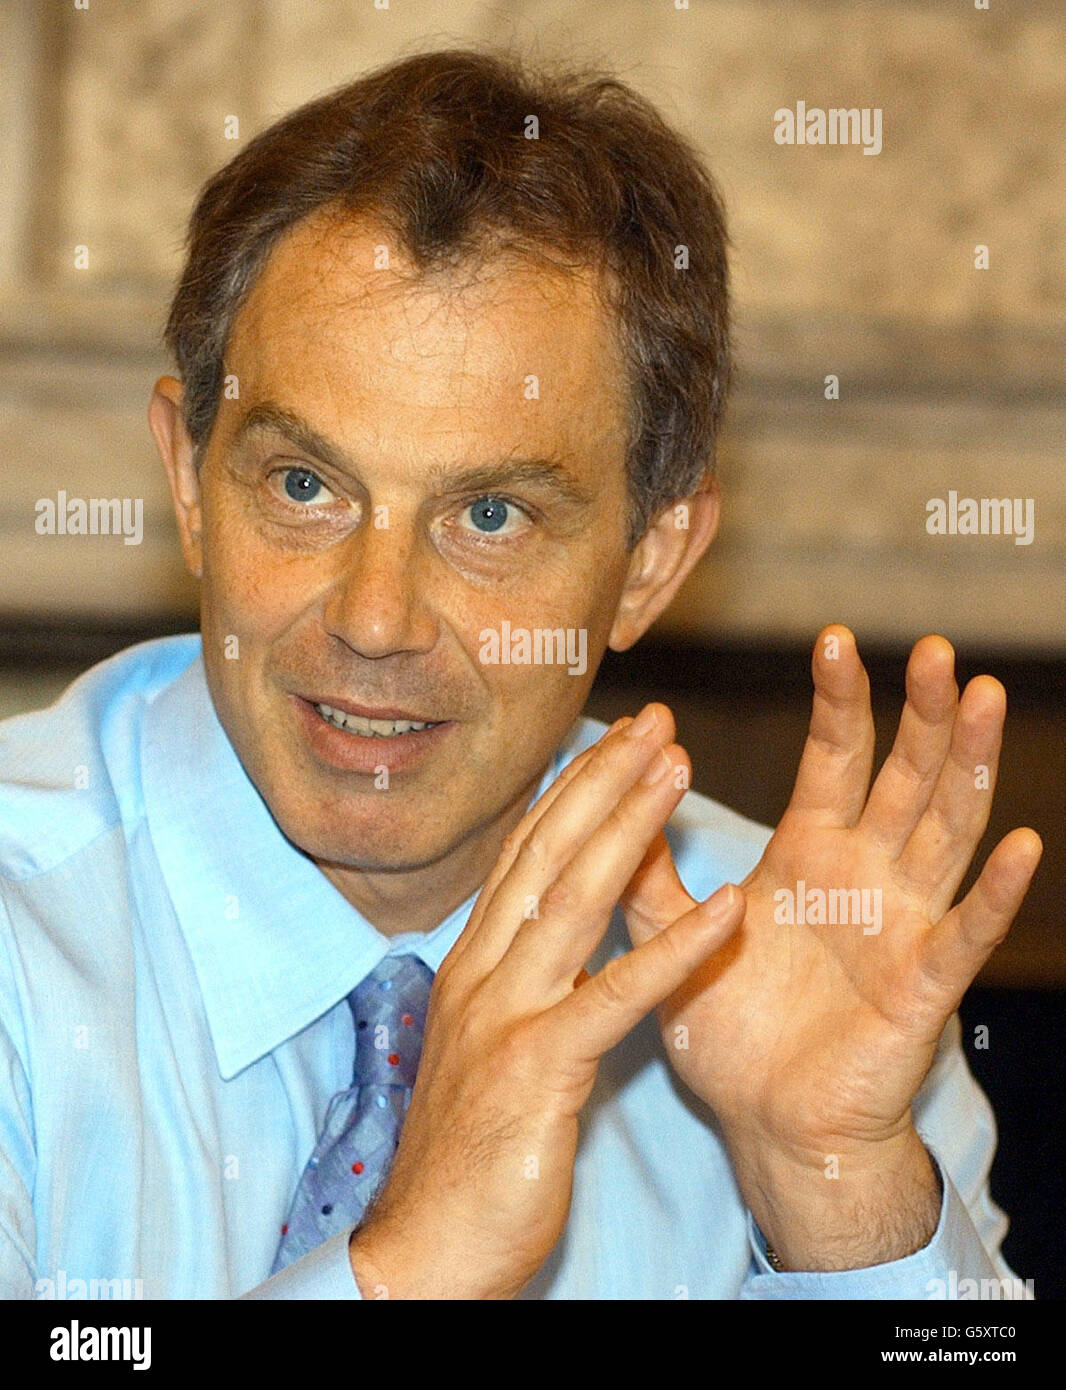 Prime Minister Tony Blair during a meeting with education heads, in the cabinet room at 10 Downing Street, London. The Prime Minister told the assembled heads and town hall education officials that there were some serious problems we have known about for a period of time. *... concerning pupil behaviour and school discipline. Stock Photo